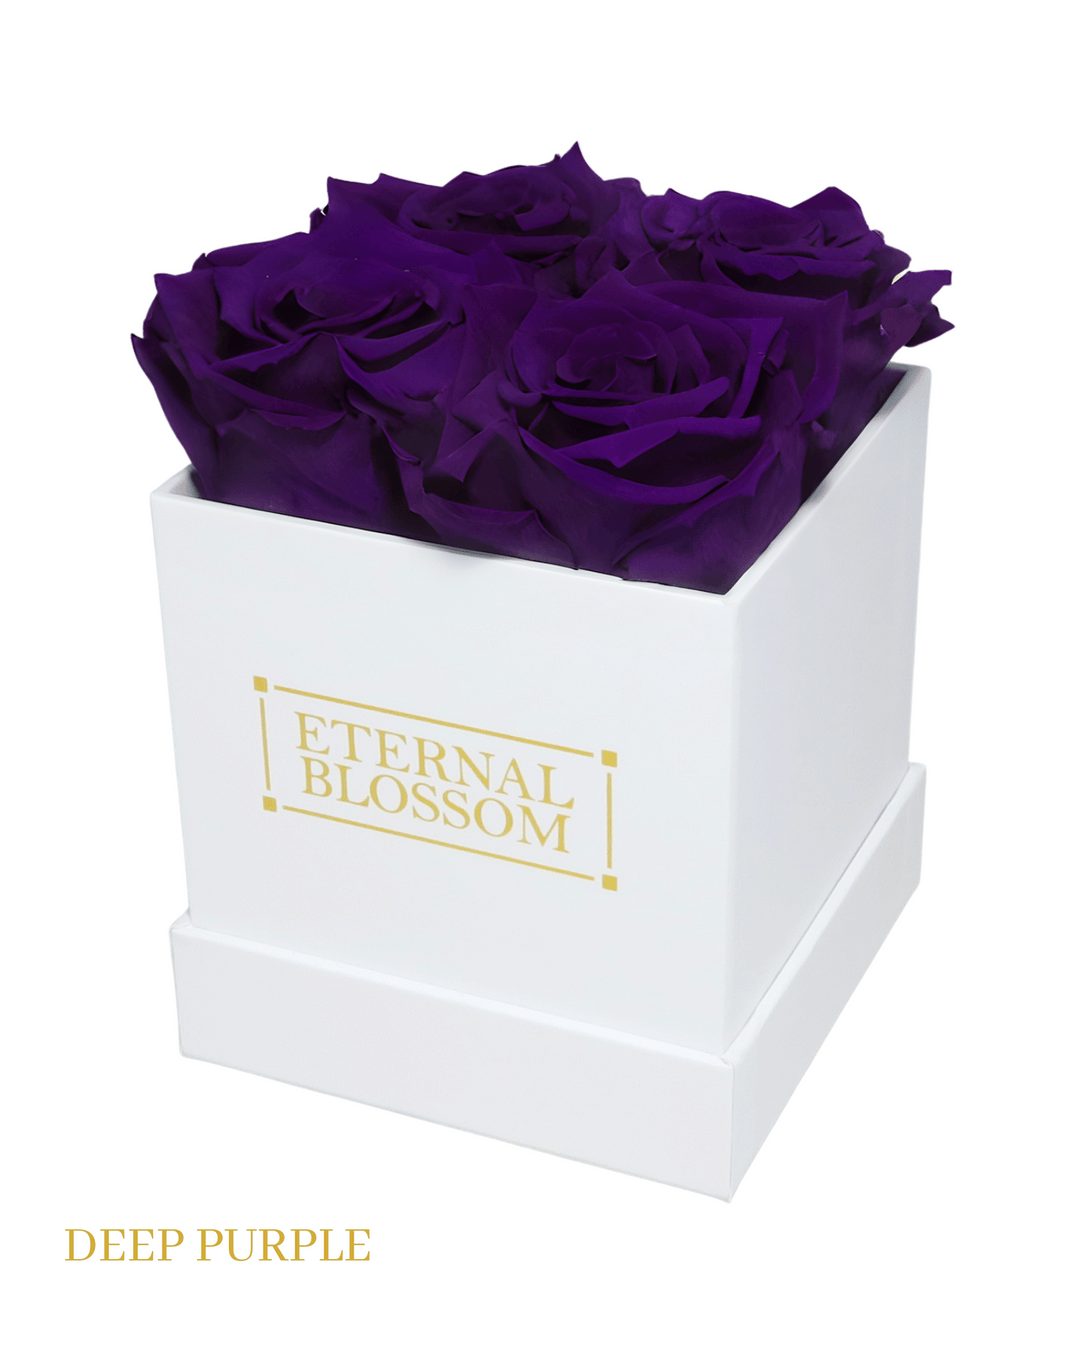 4 Piece Blossom Box - White Box - All Colours of Year Lasting Infinity Roses